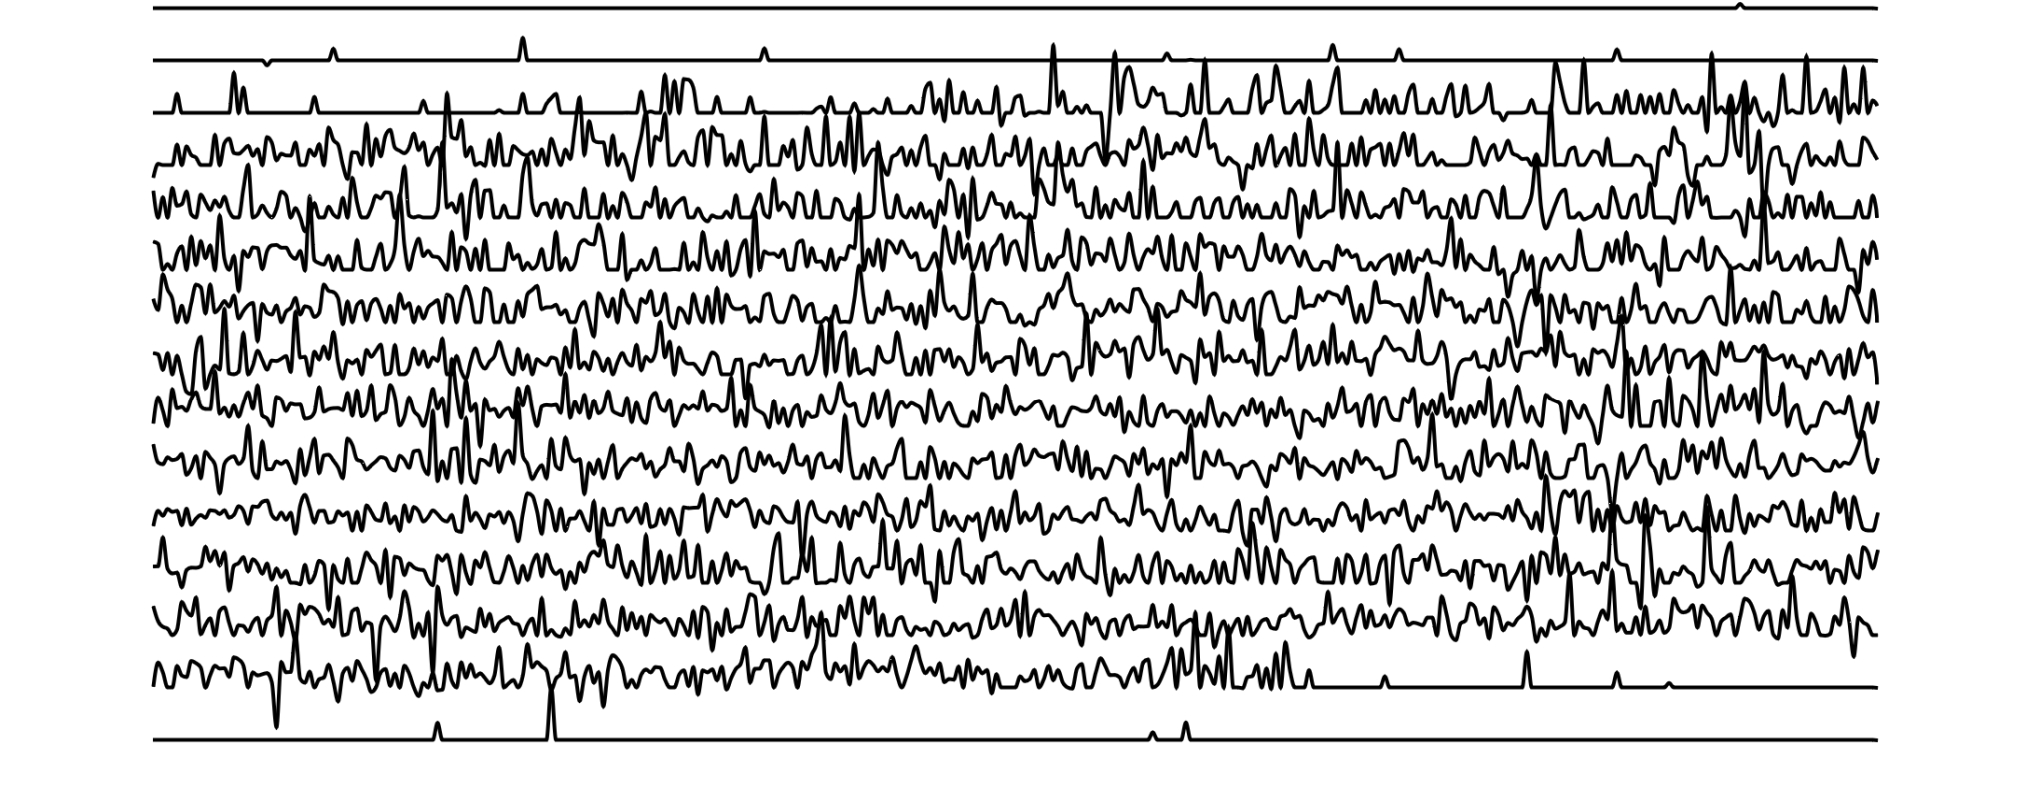 A series of dark wavy lines propagating from left to right across a pale background and showing a variable peaks and troughs.